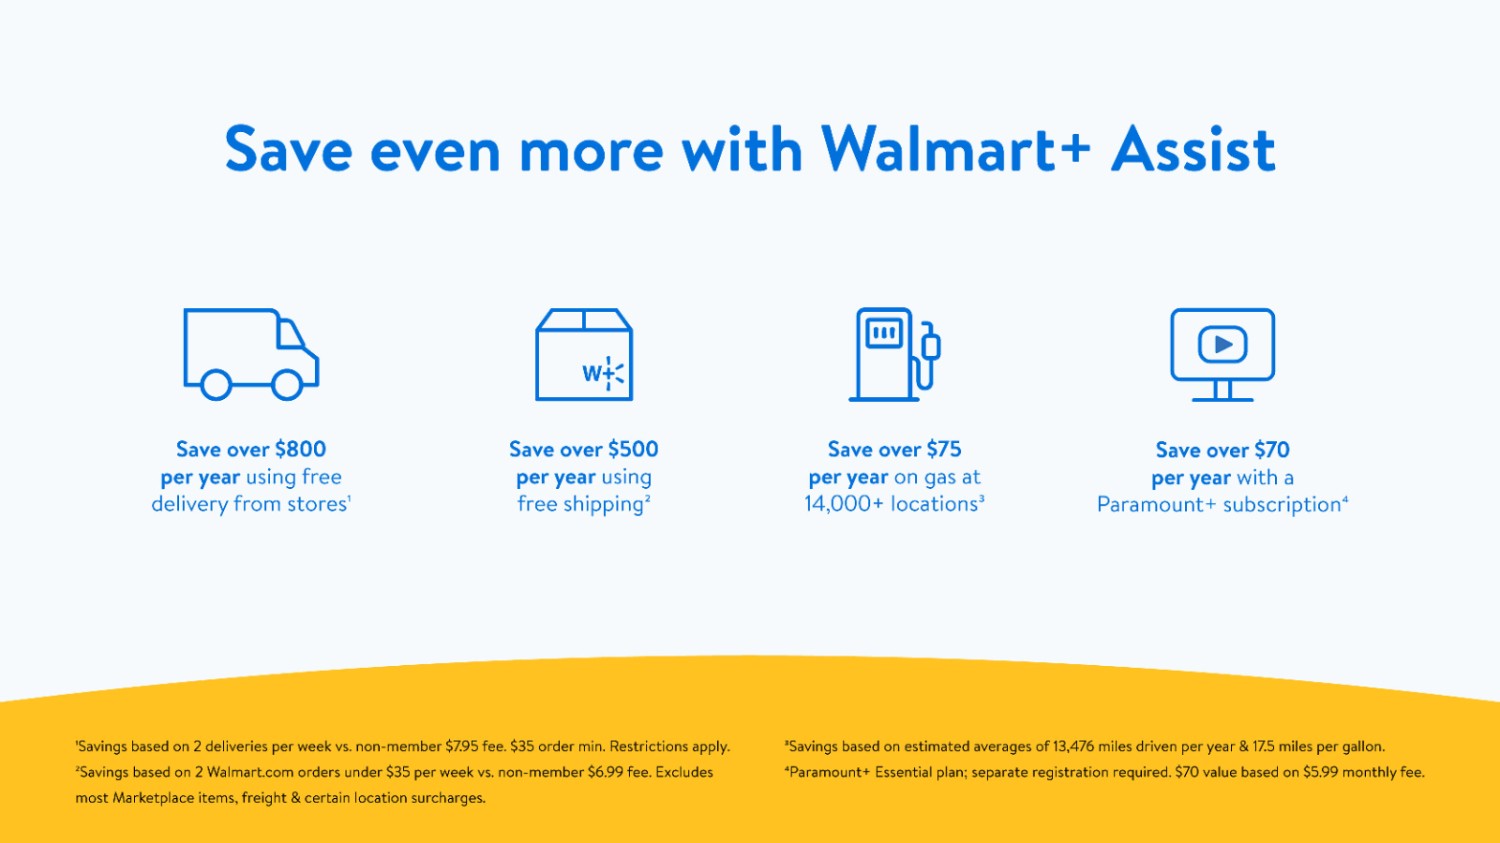 Walmart Launches Walmart+ Assist Half Price Memberships for Those on